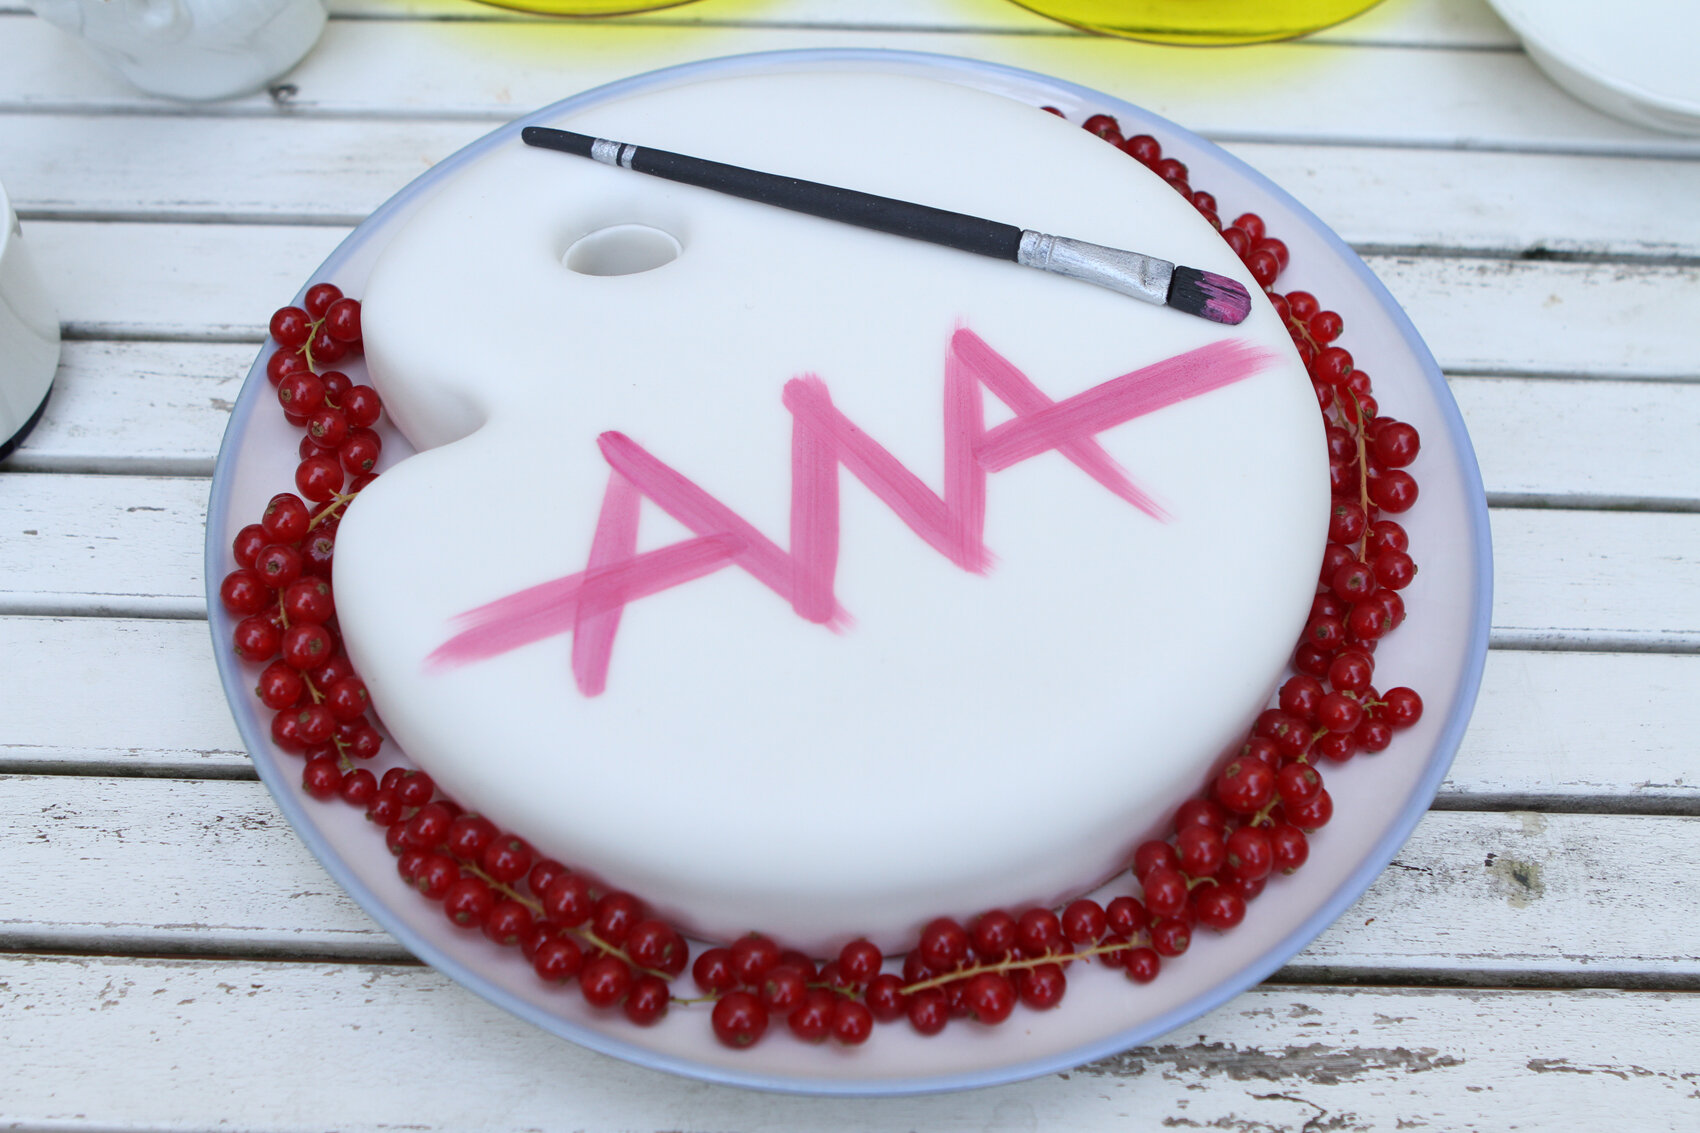  Though we are very sad, the organization is closing, all of us at AWA are happy with the work accomplished and the valuable relationships forged. So let us be merry, and… let there be cake! (Ph. S. Duca) 